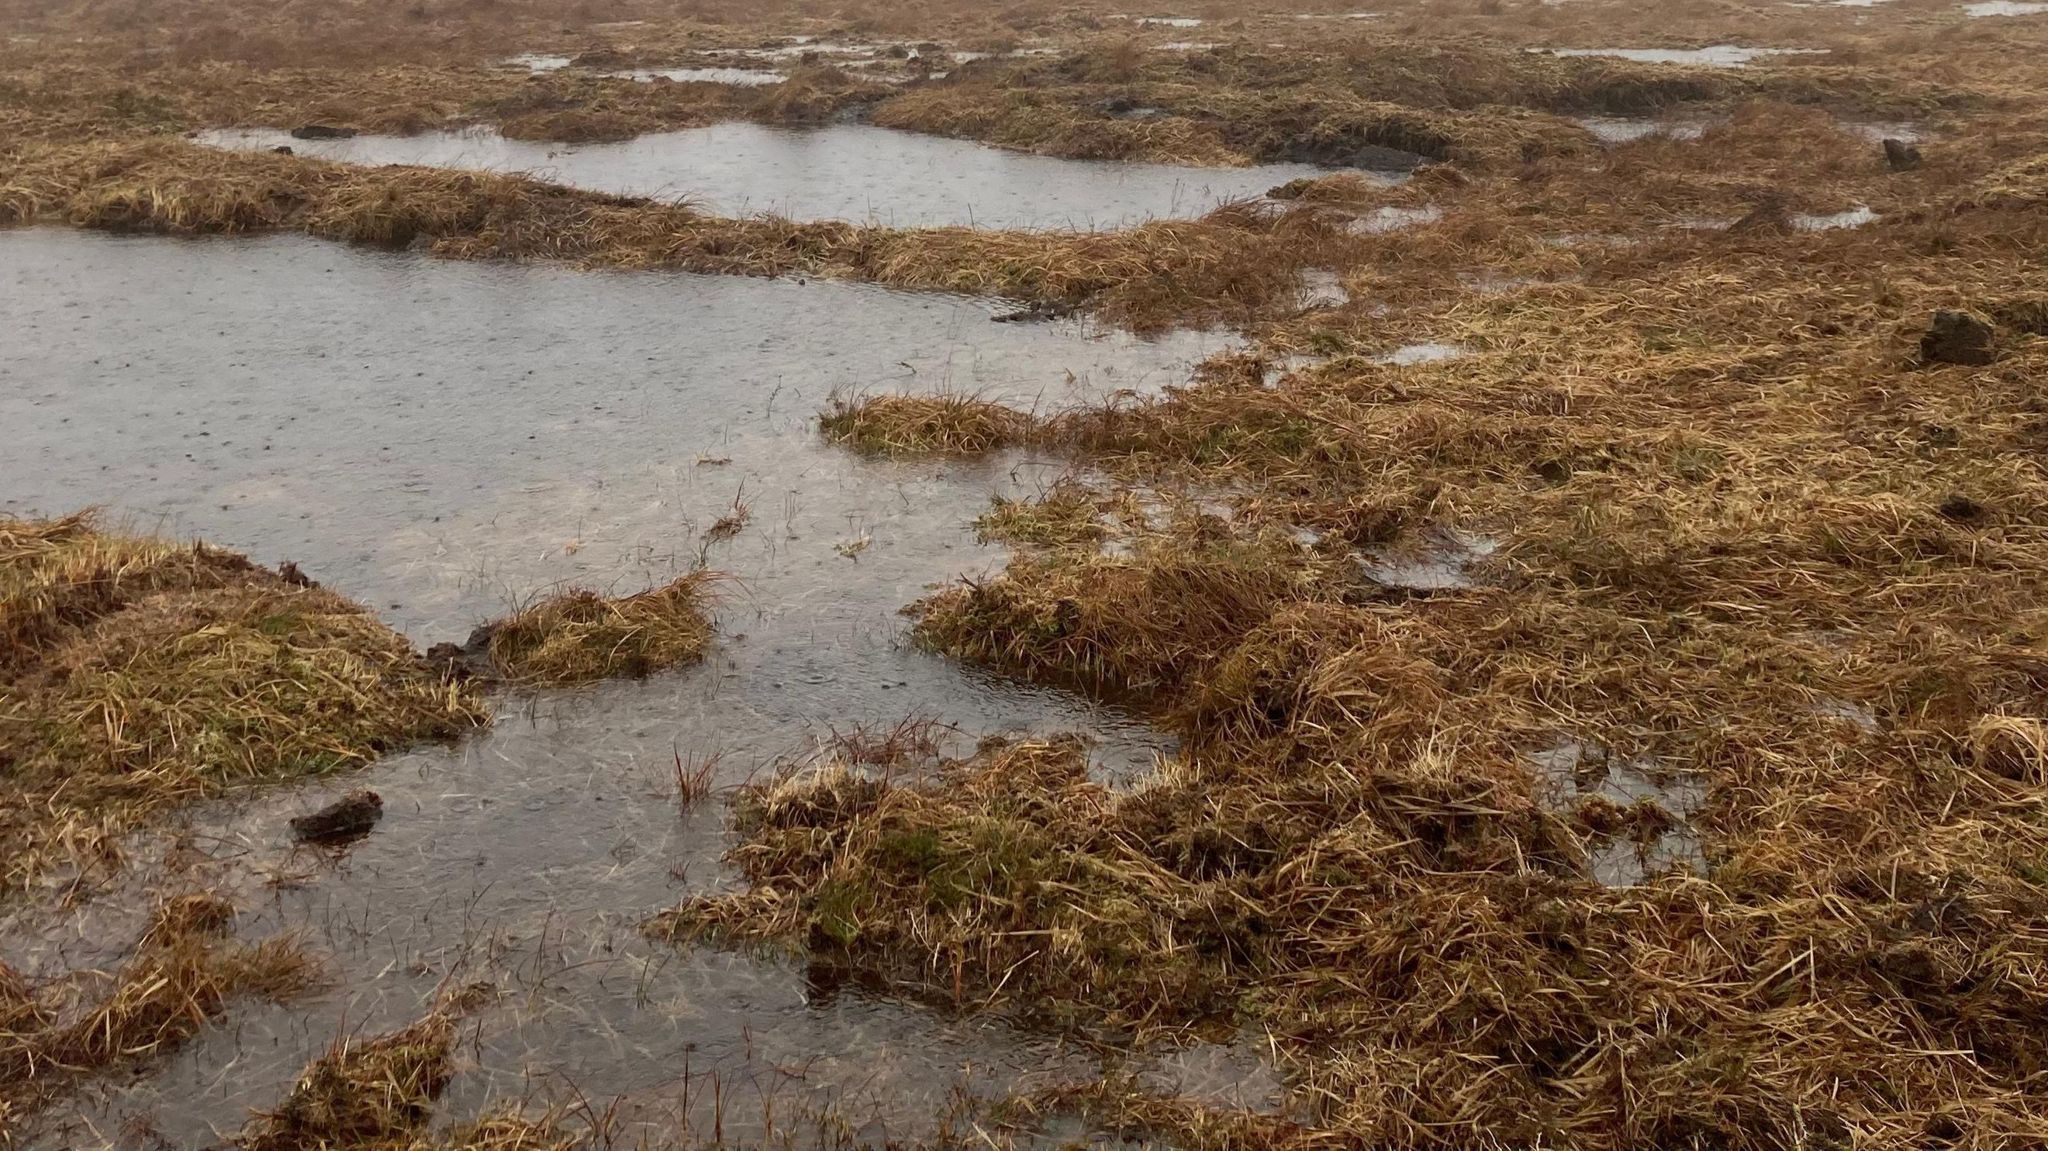 A peat bog. Puddles of water surrounded by decaying plants.